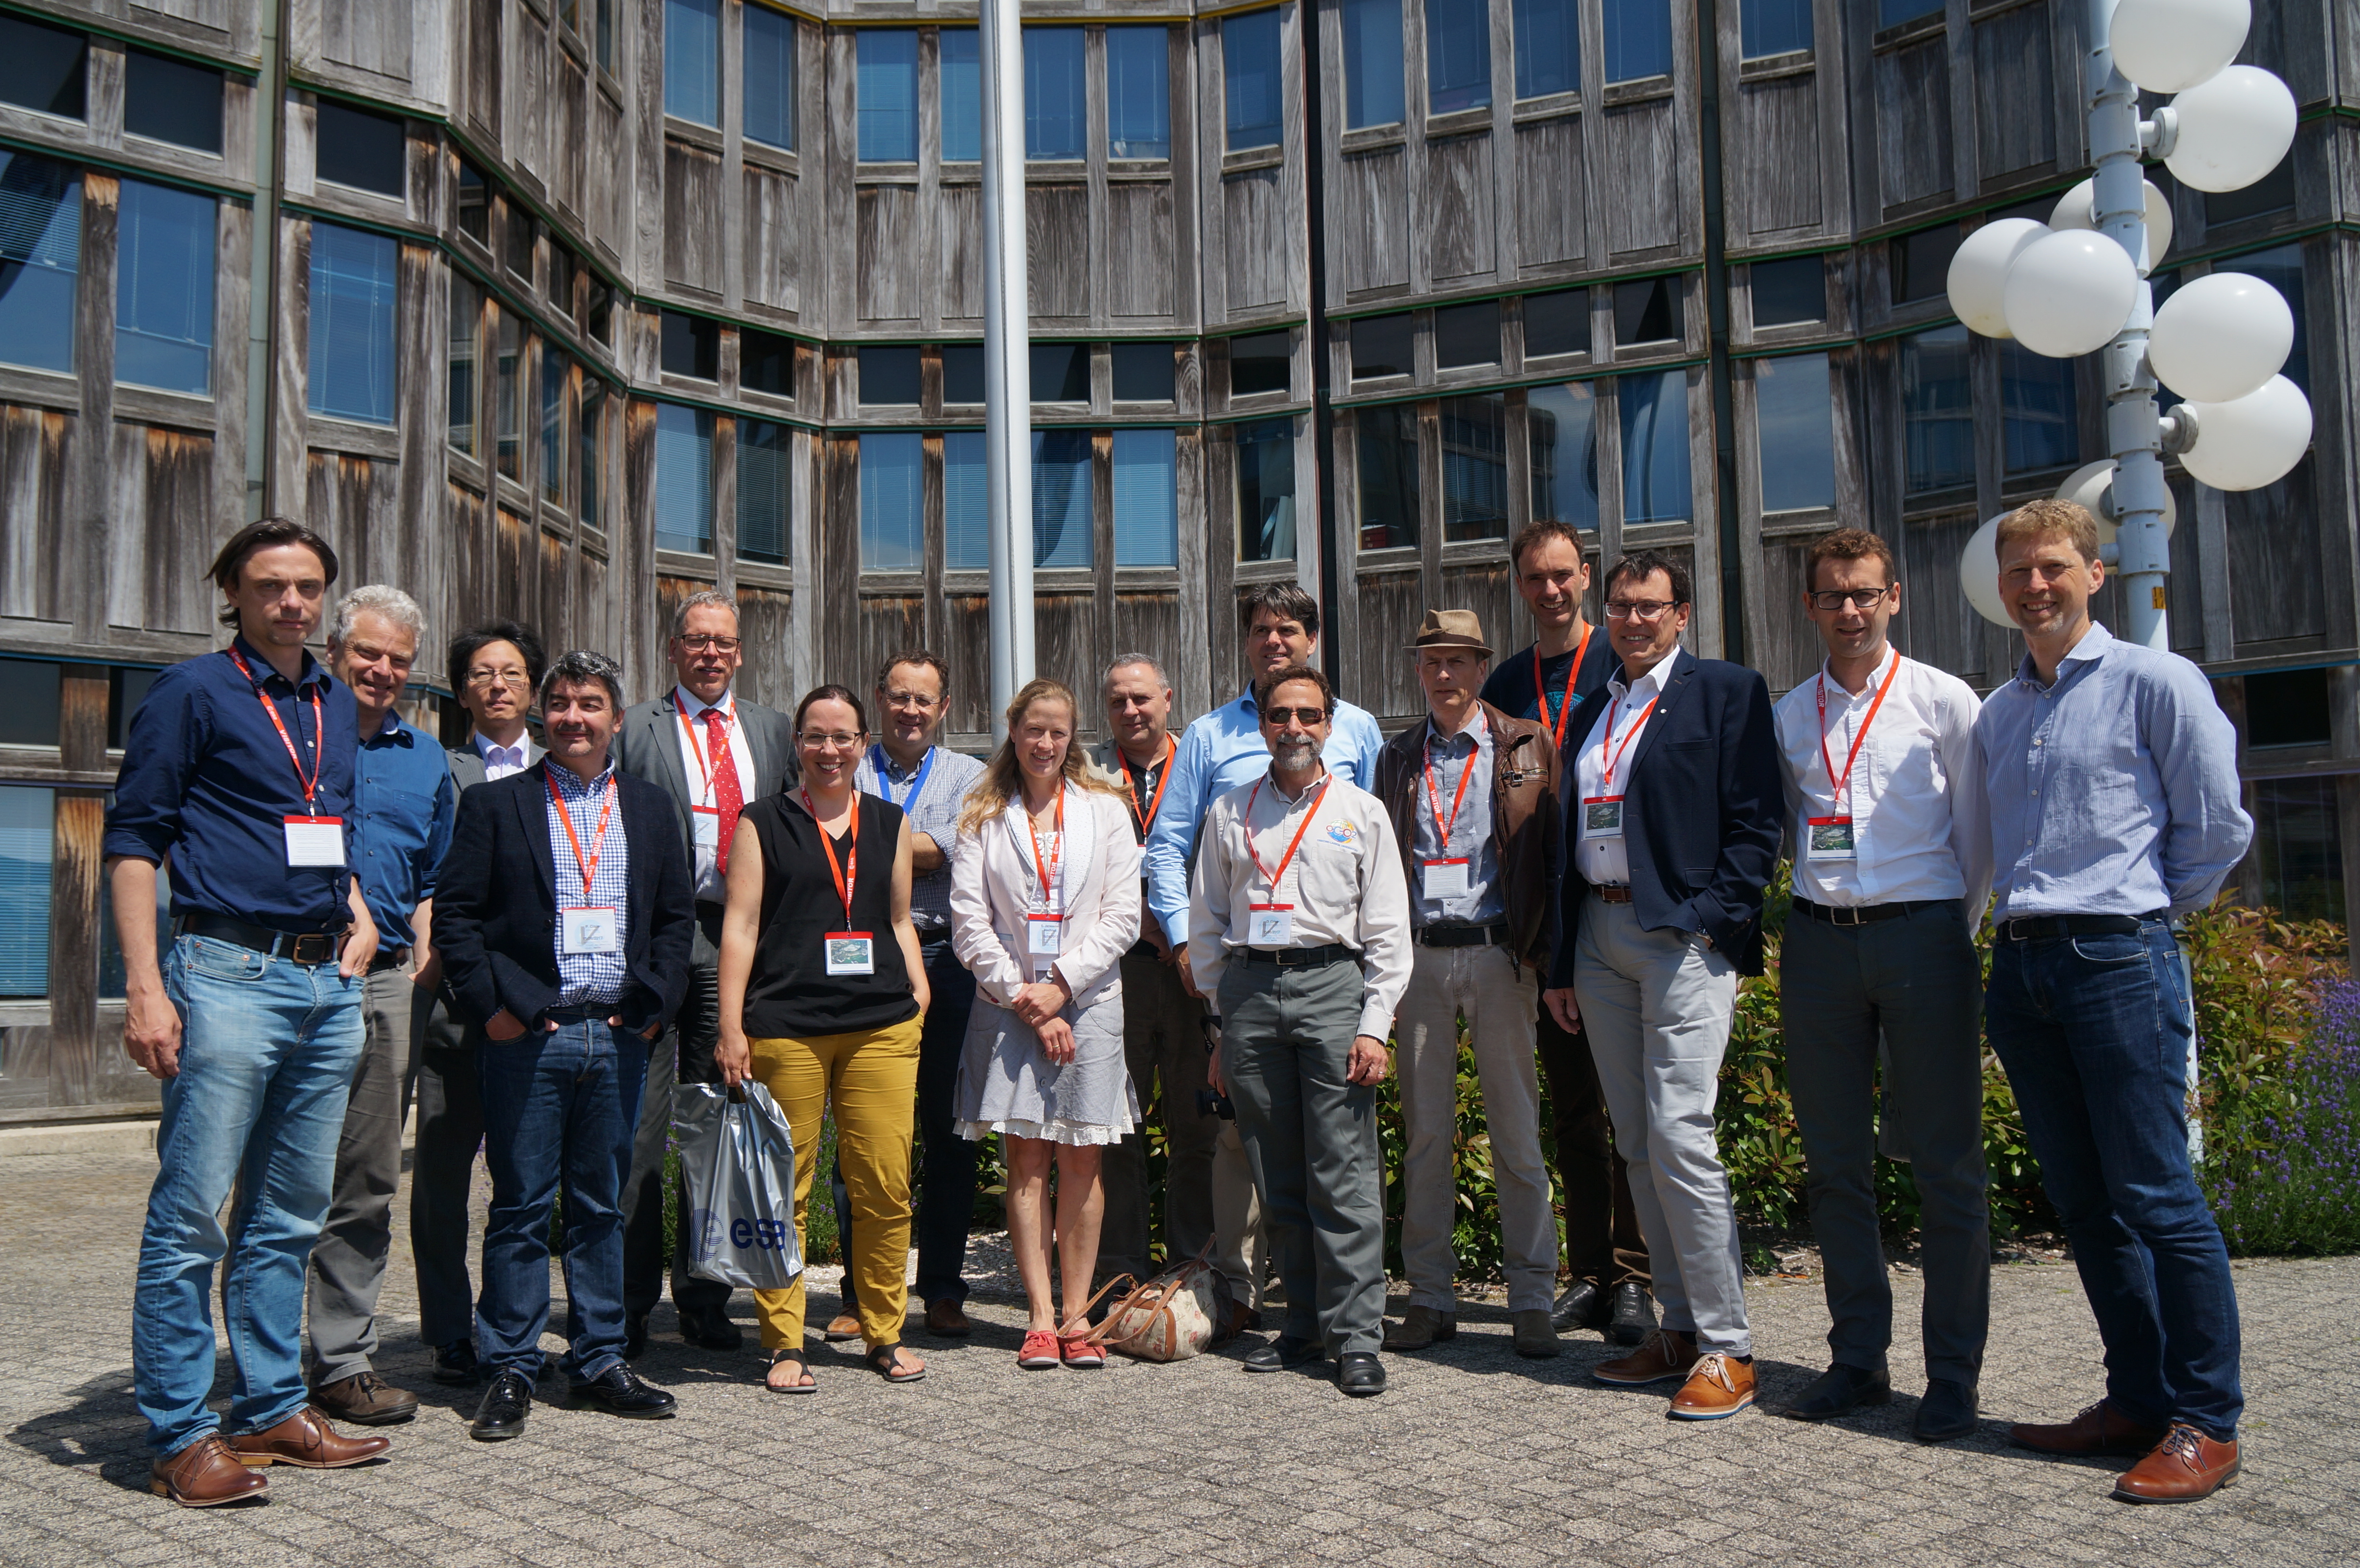 A group of about 20 scientists involved in efforts to measure carbon dioxide from space pose together outside on a sunny day in front of an agency building in the Netherlands, amongst them Dave Crisp